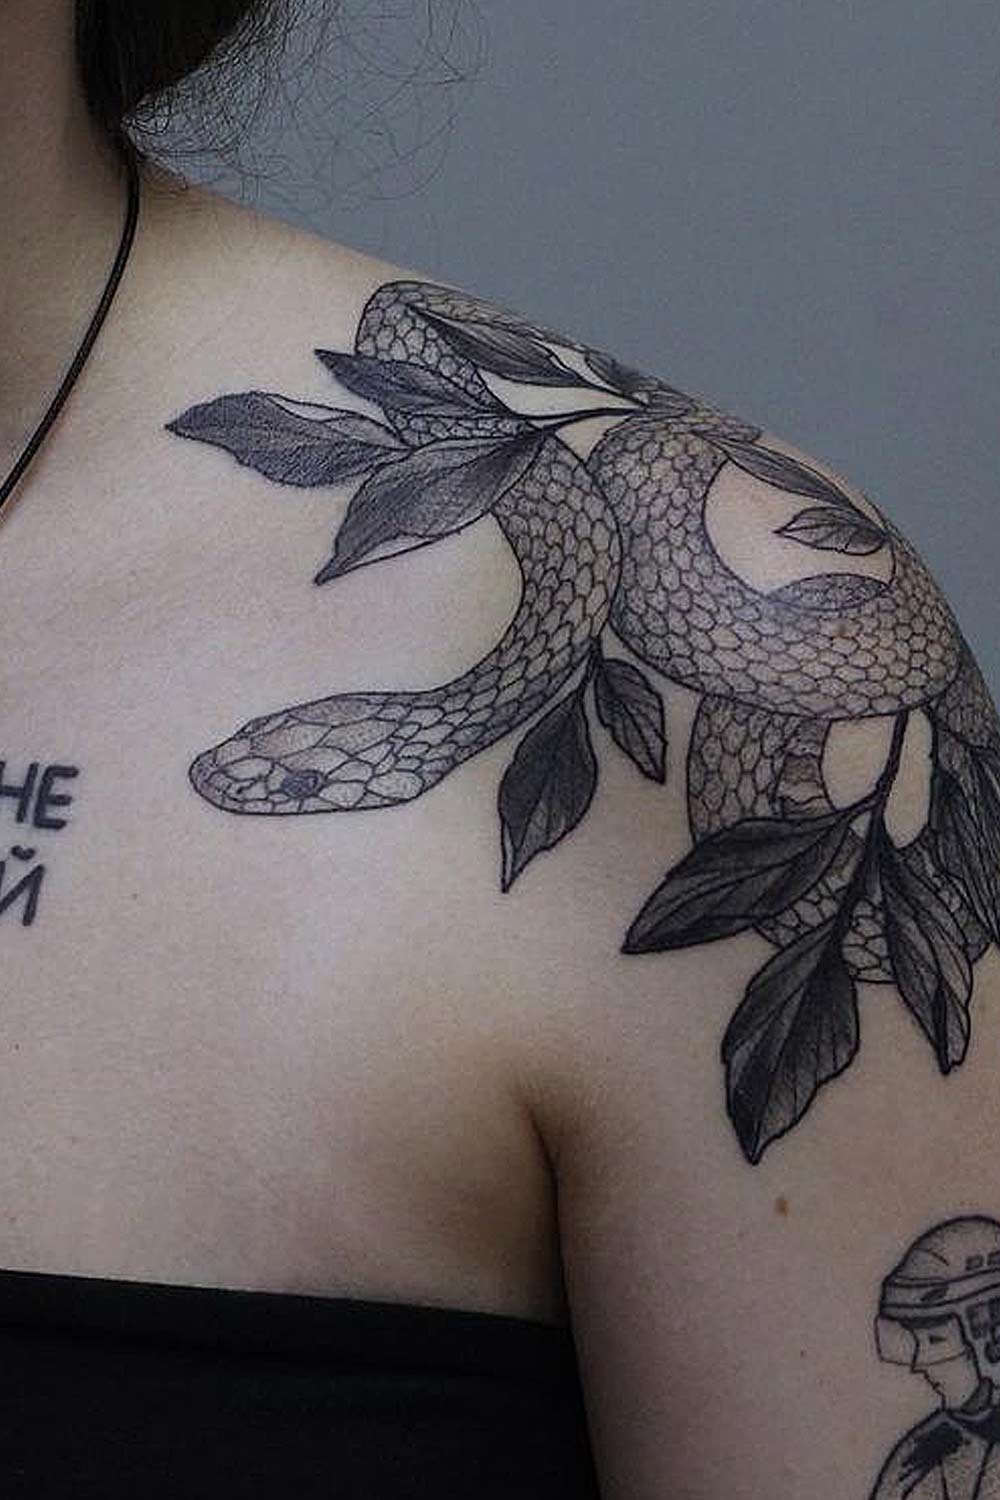 Shoulder Tattoo with Snake and Leaves